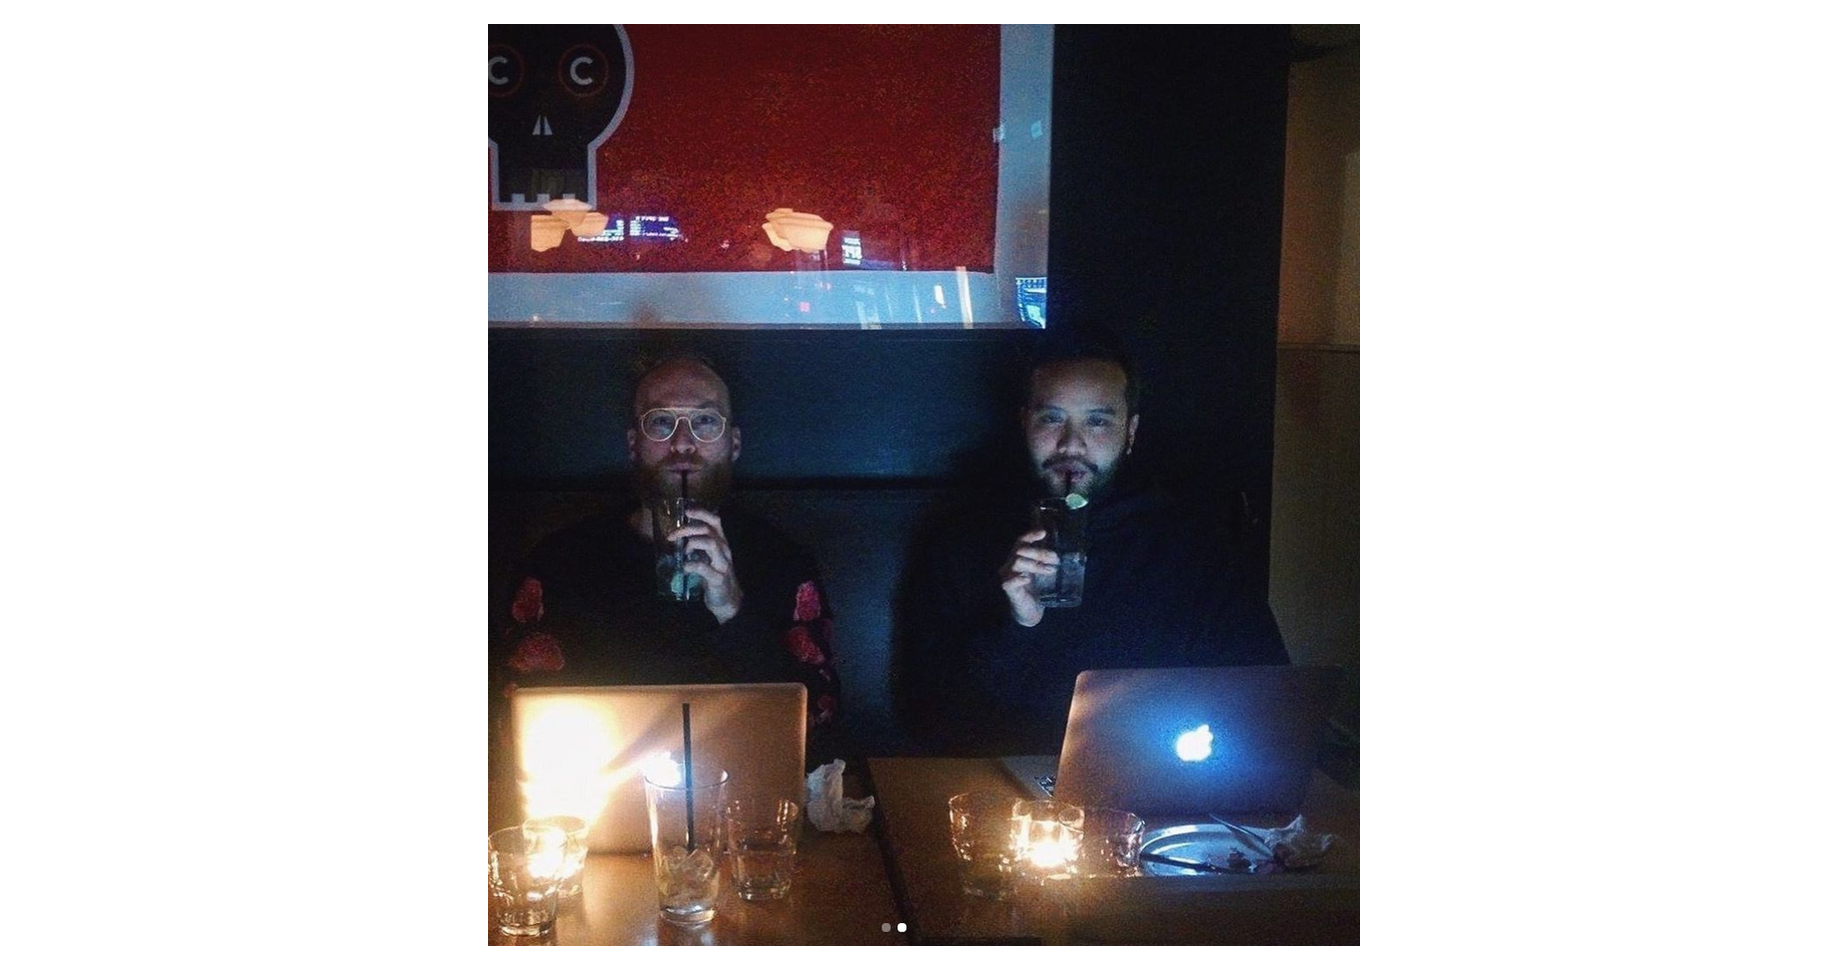 Phil and Armand on their laptops at a bar working from the early days